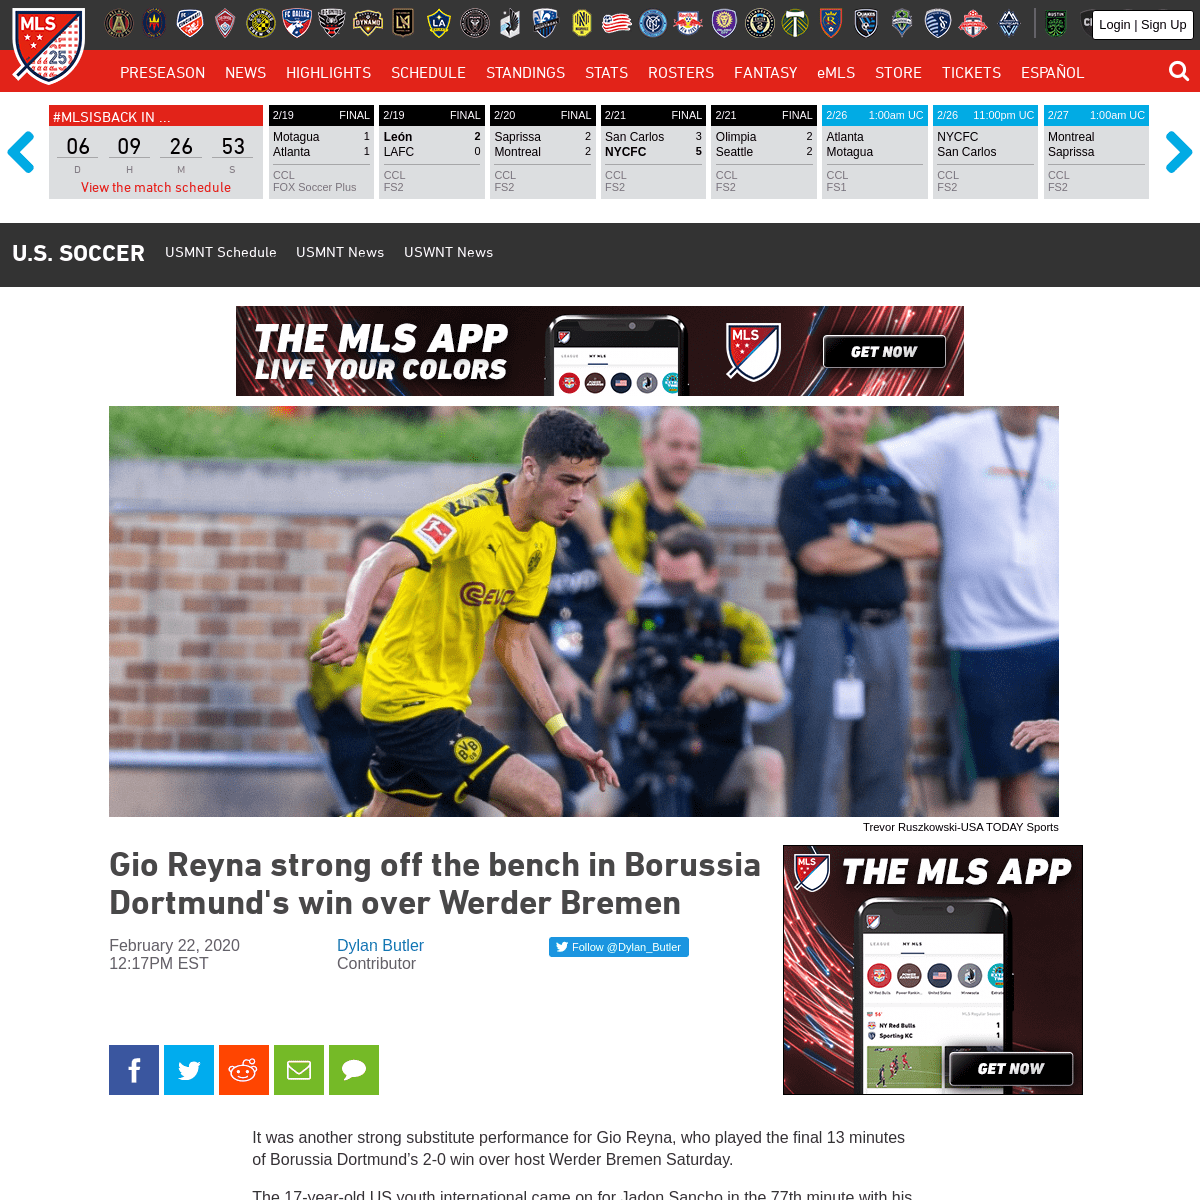 A complete backup of www.mlssoccer.com/post/2020/02/22/gio-reyna-strong-bench-borussia-dortmunds-win-over-werder-bremen